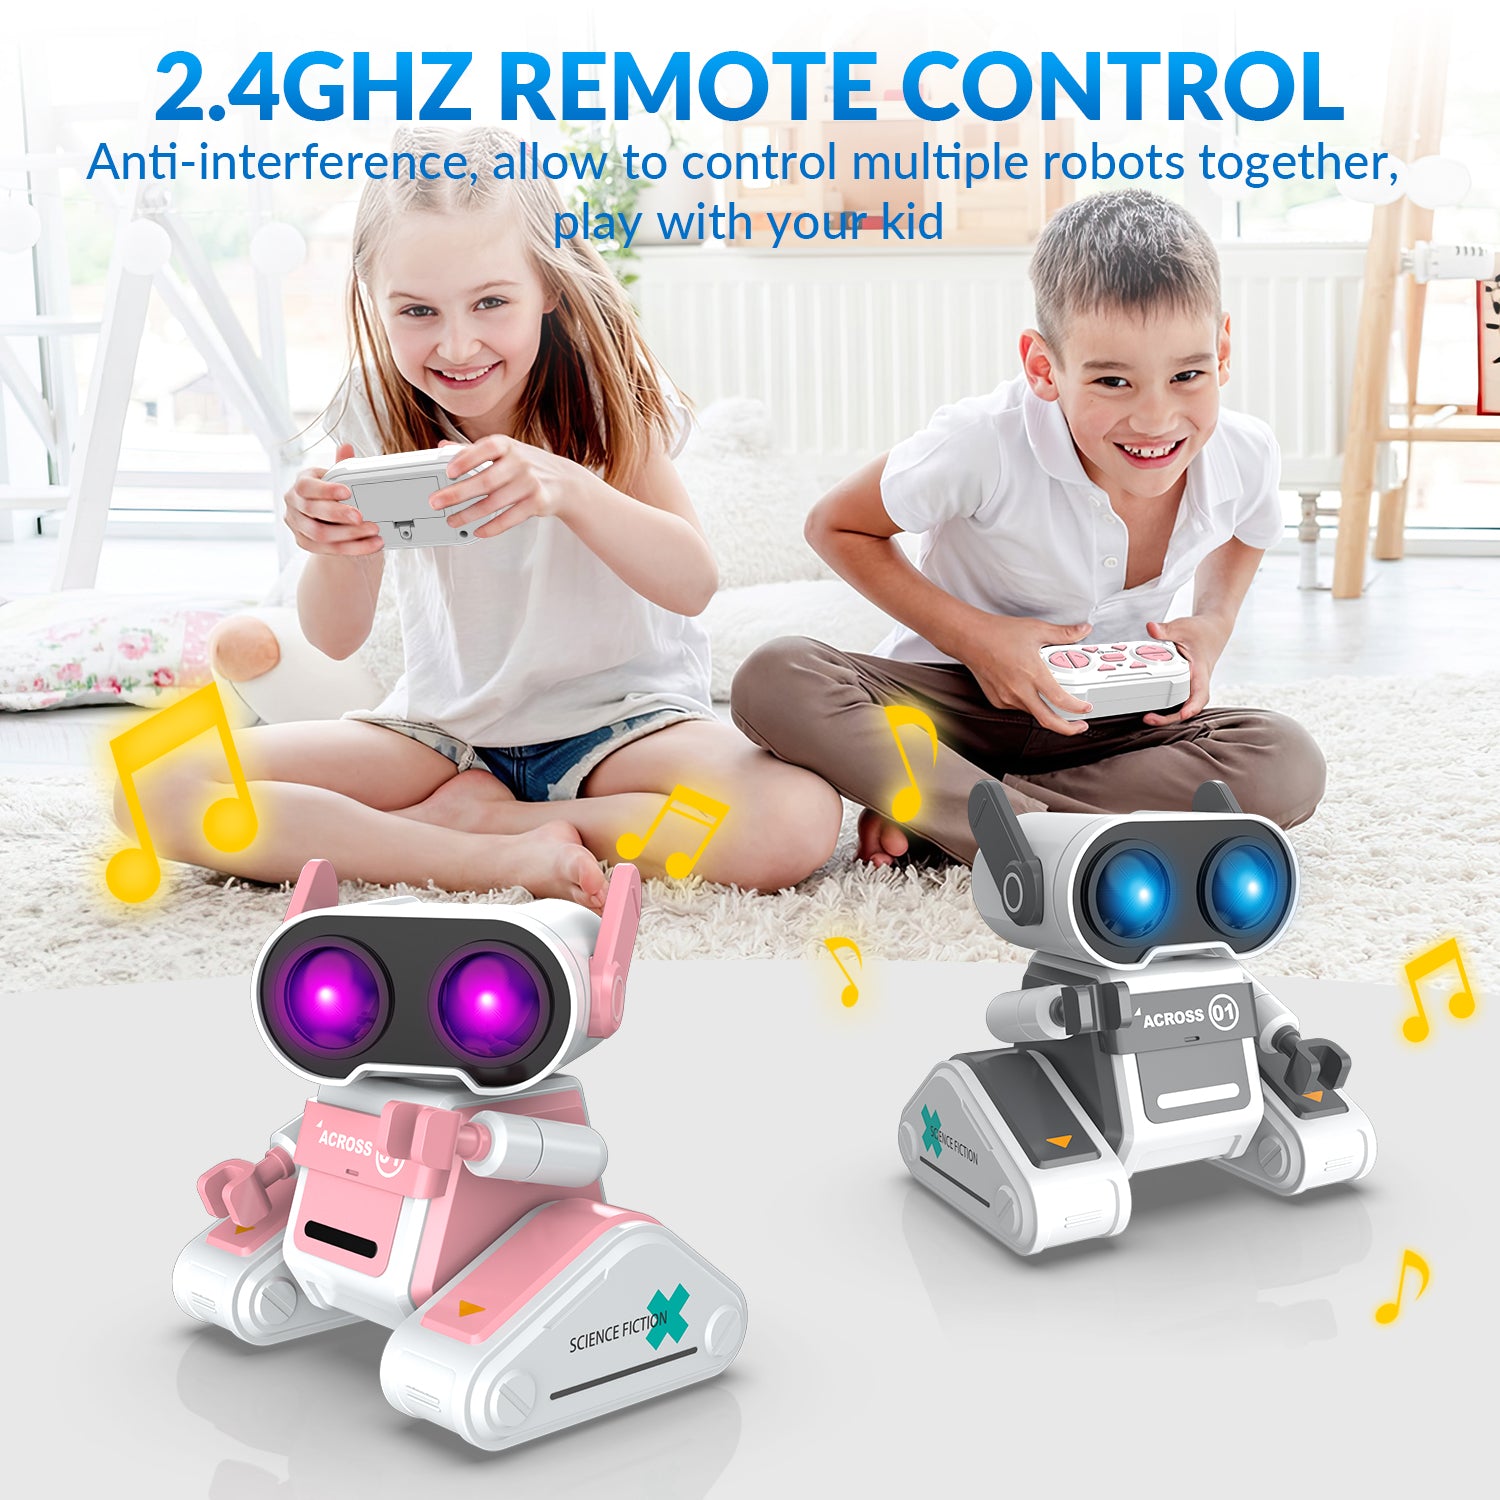 STEMTRON Rechargeable RC Robot Toys with Auto Demo, Dance Moves, Music for Kids (Pink)